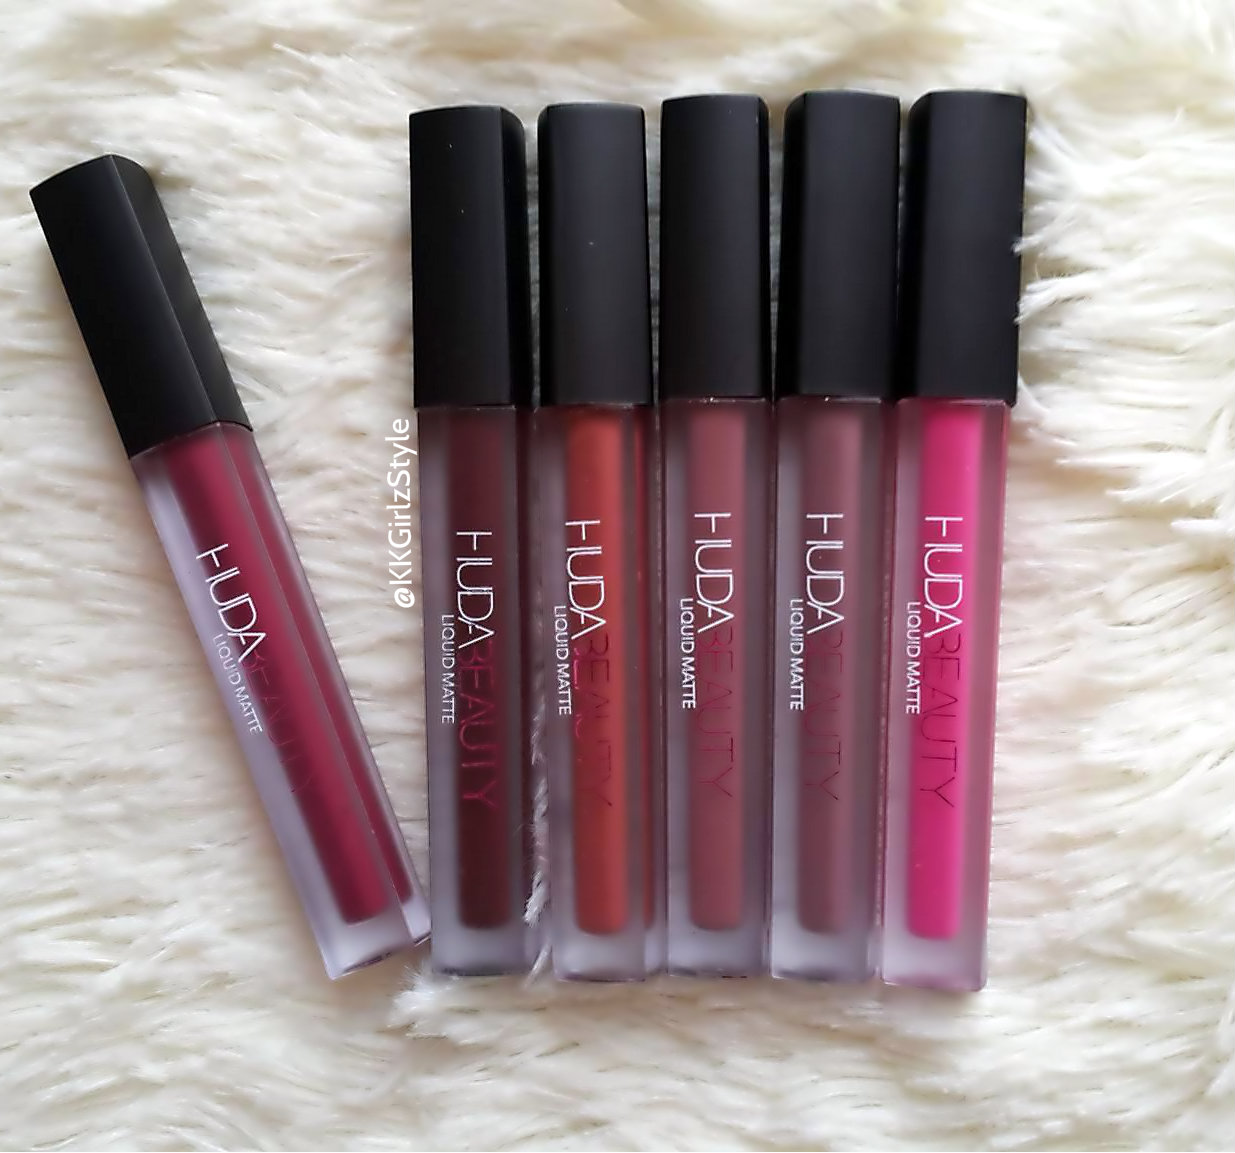 Huda Beauty Liquid Matte Lip Colors Review and Swatches